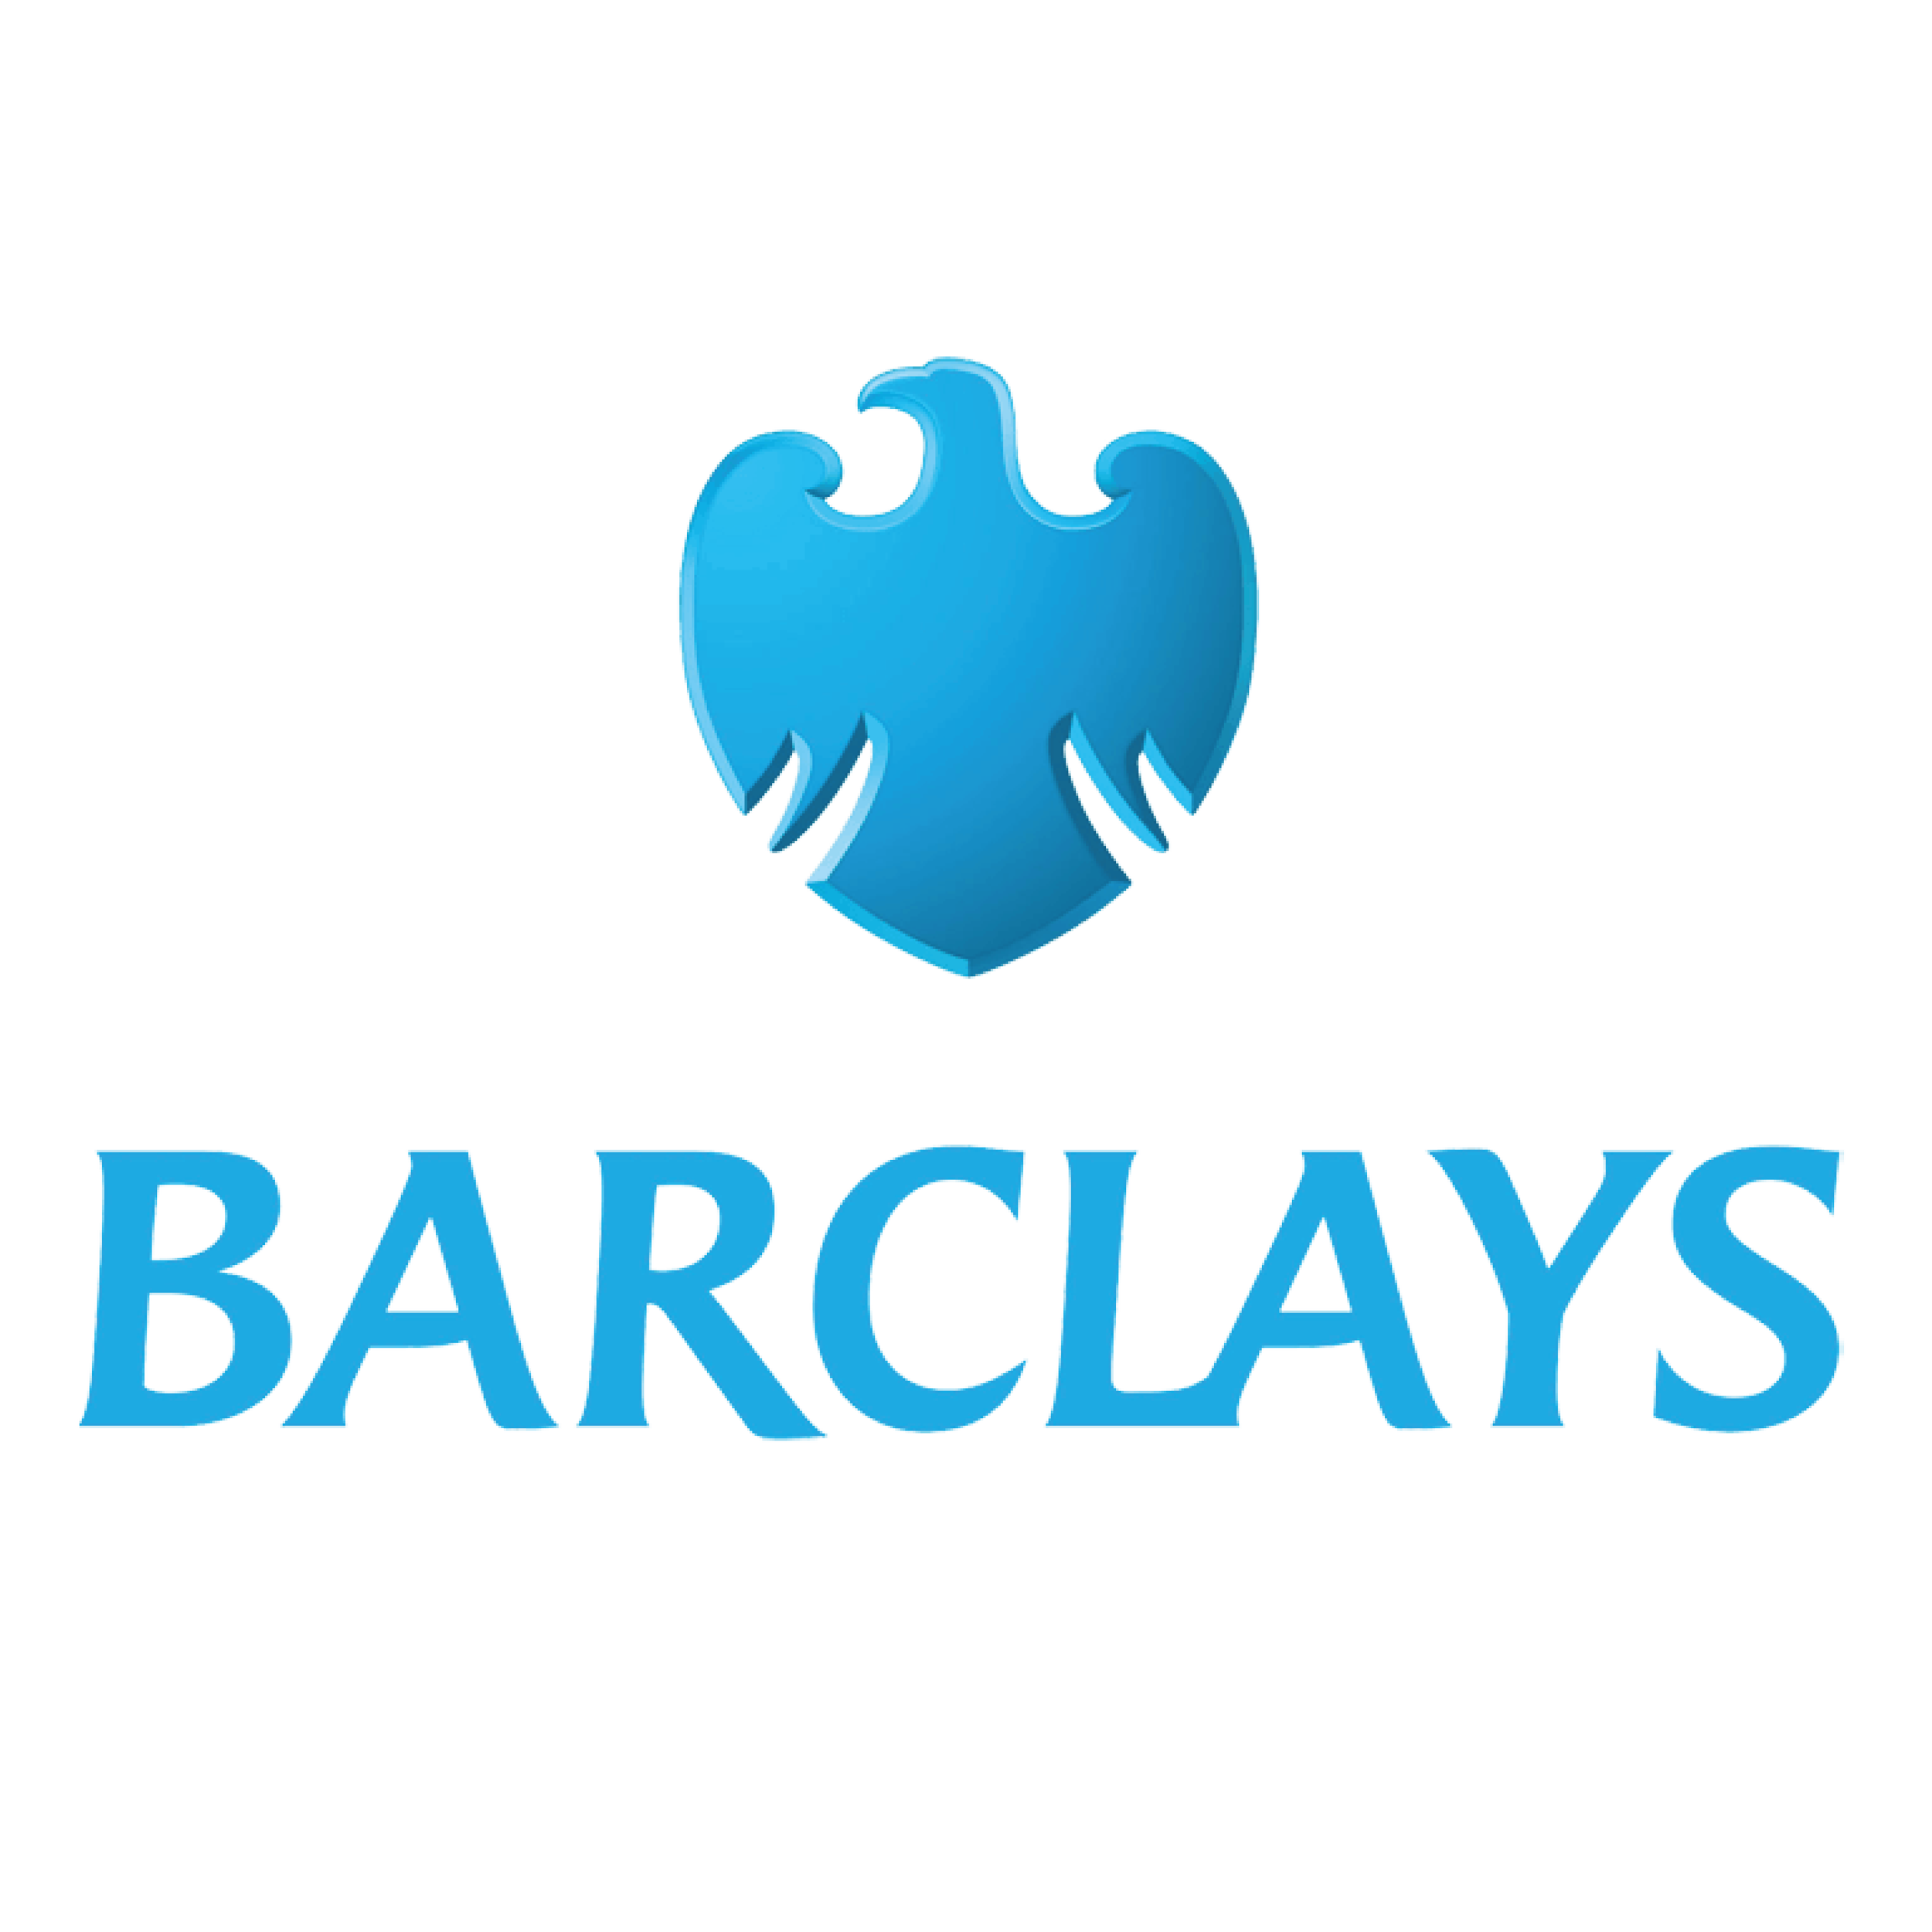 BARCLAYS-01.png